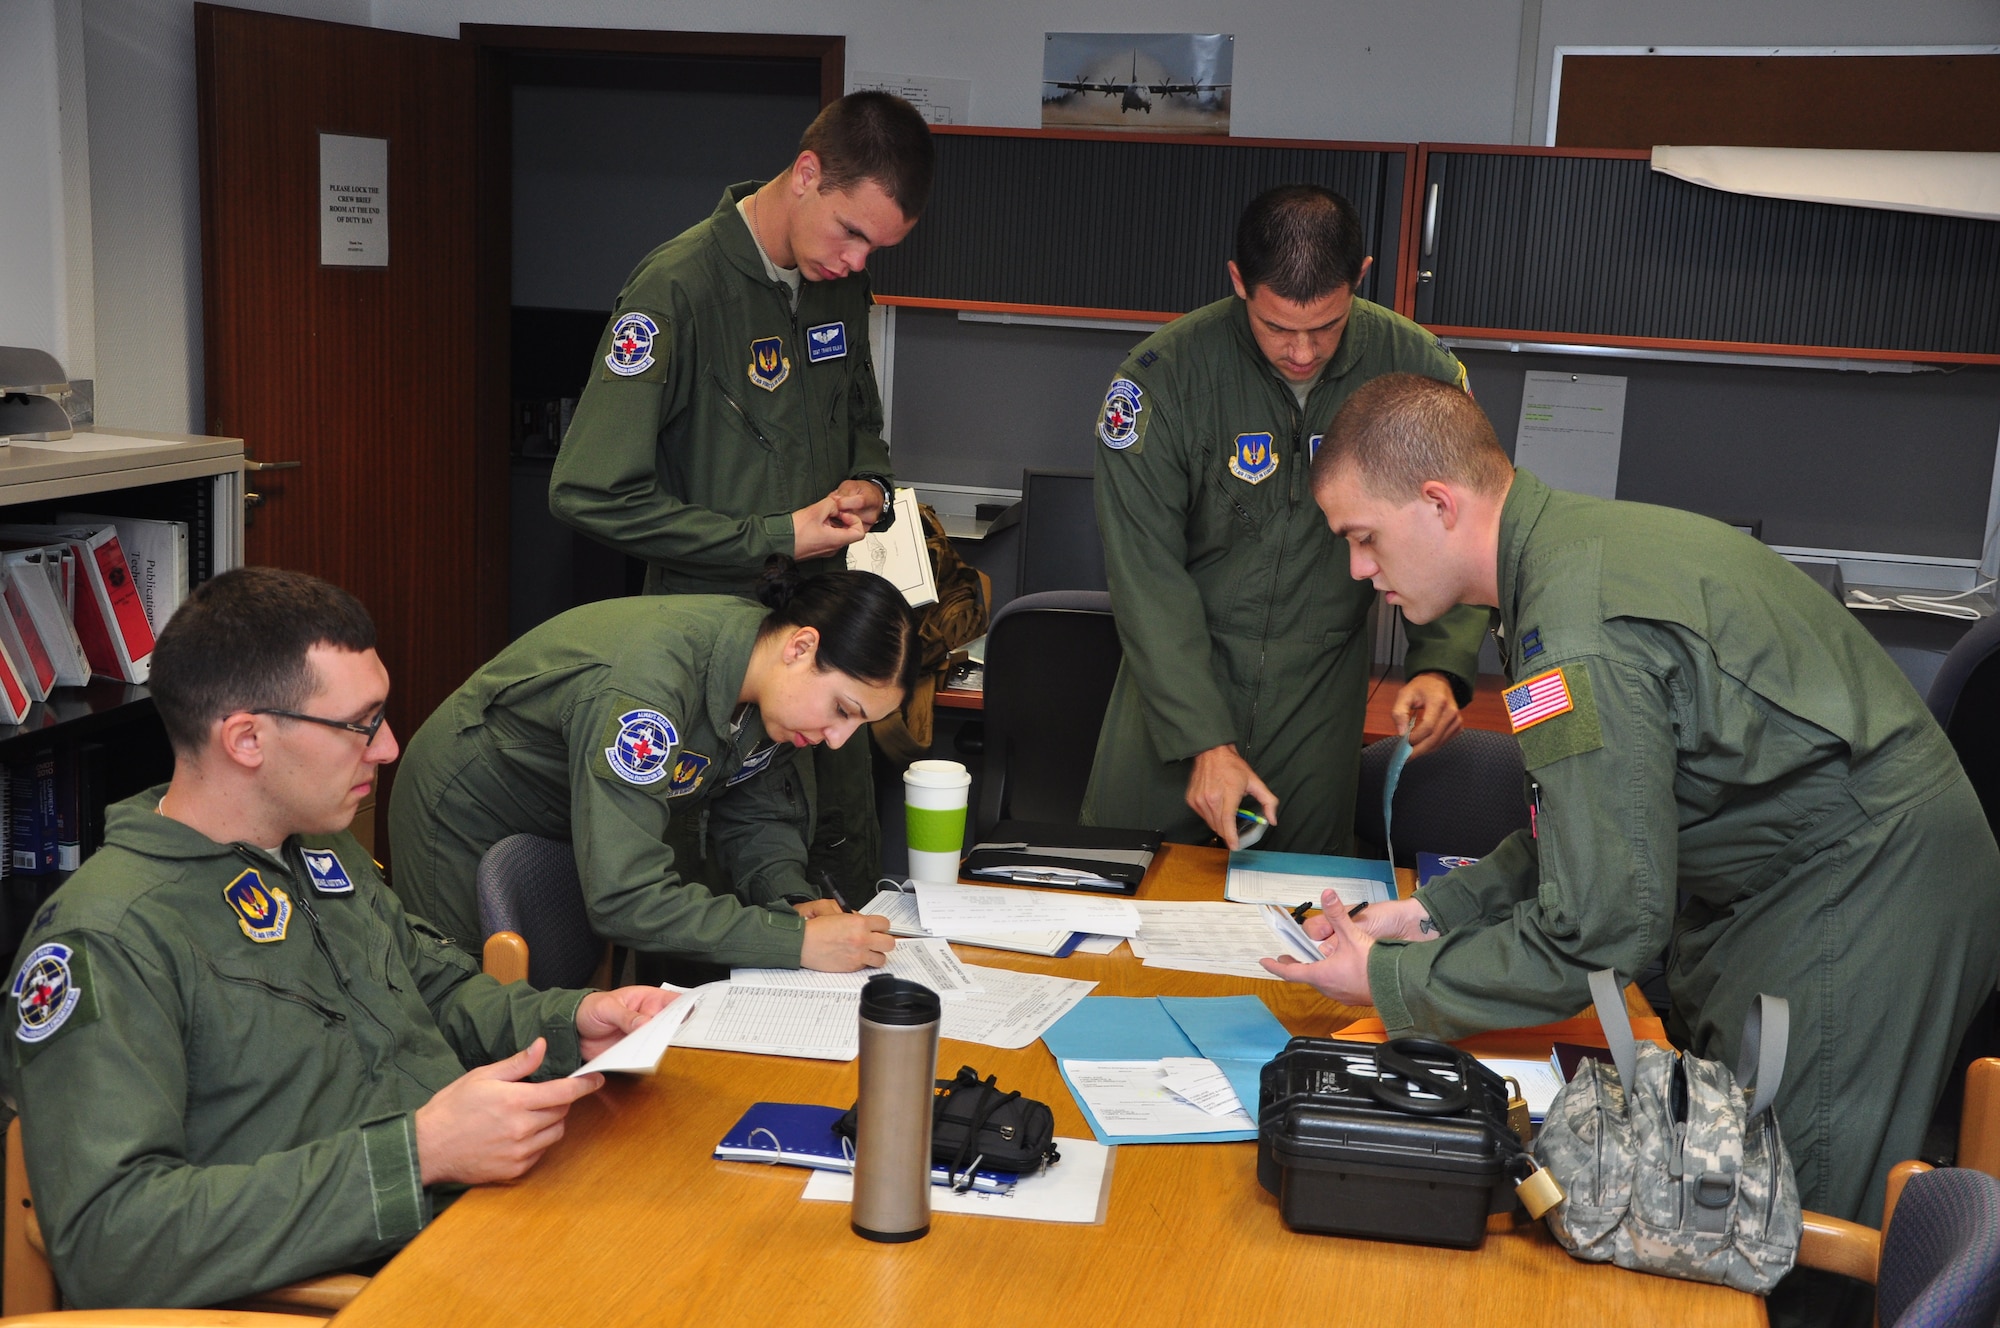 Members of the 86th Aeromedical Evacuation Squadron review checklists prior to a mission testing their capabilities on a new airframe at Ramstein Air Base, Germany, Sept. 3, 2012. The squadron is hoping to start using the civilian Gulfstream III, or G3, aircraft for short missions to Africa and Eurasia. (U.S. Air Force photo/Tech. Sgt. Chad Thompson)